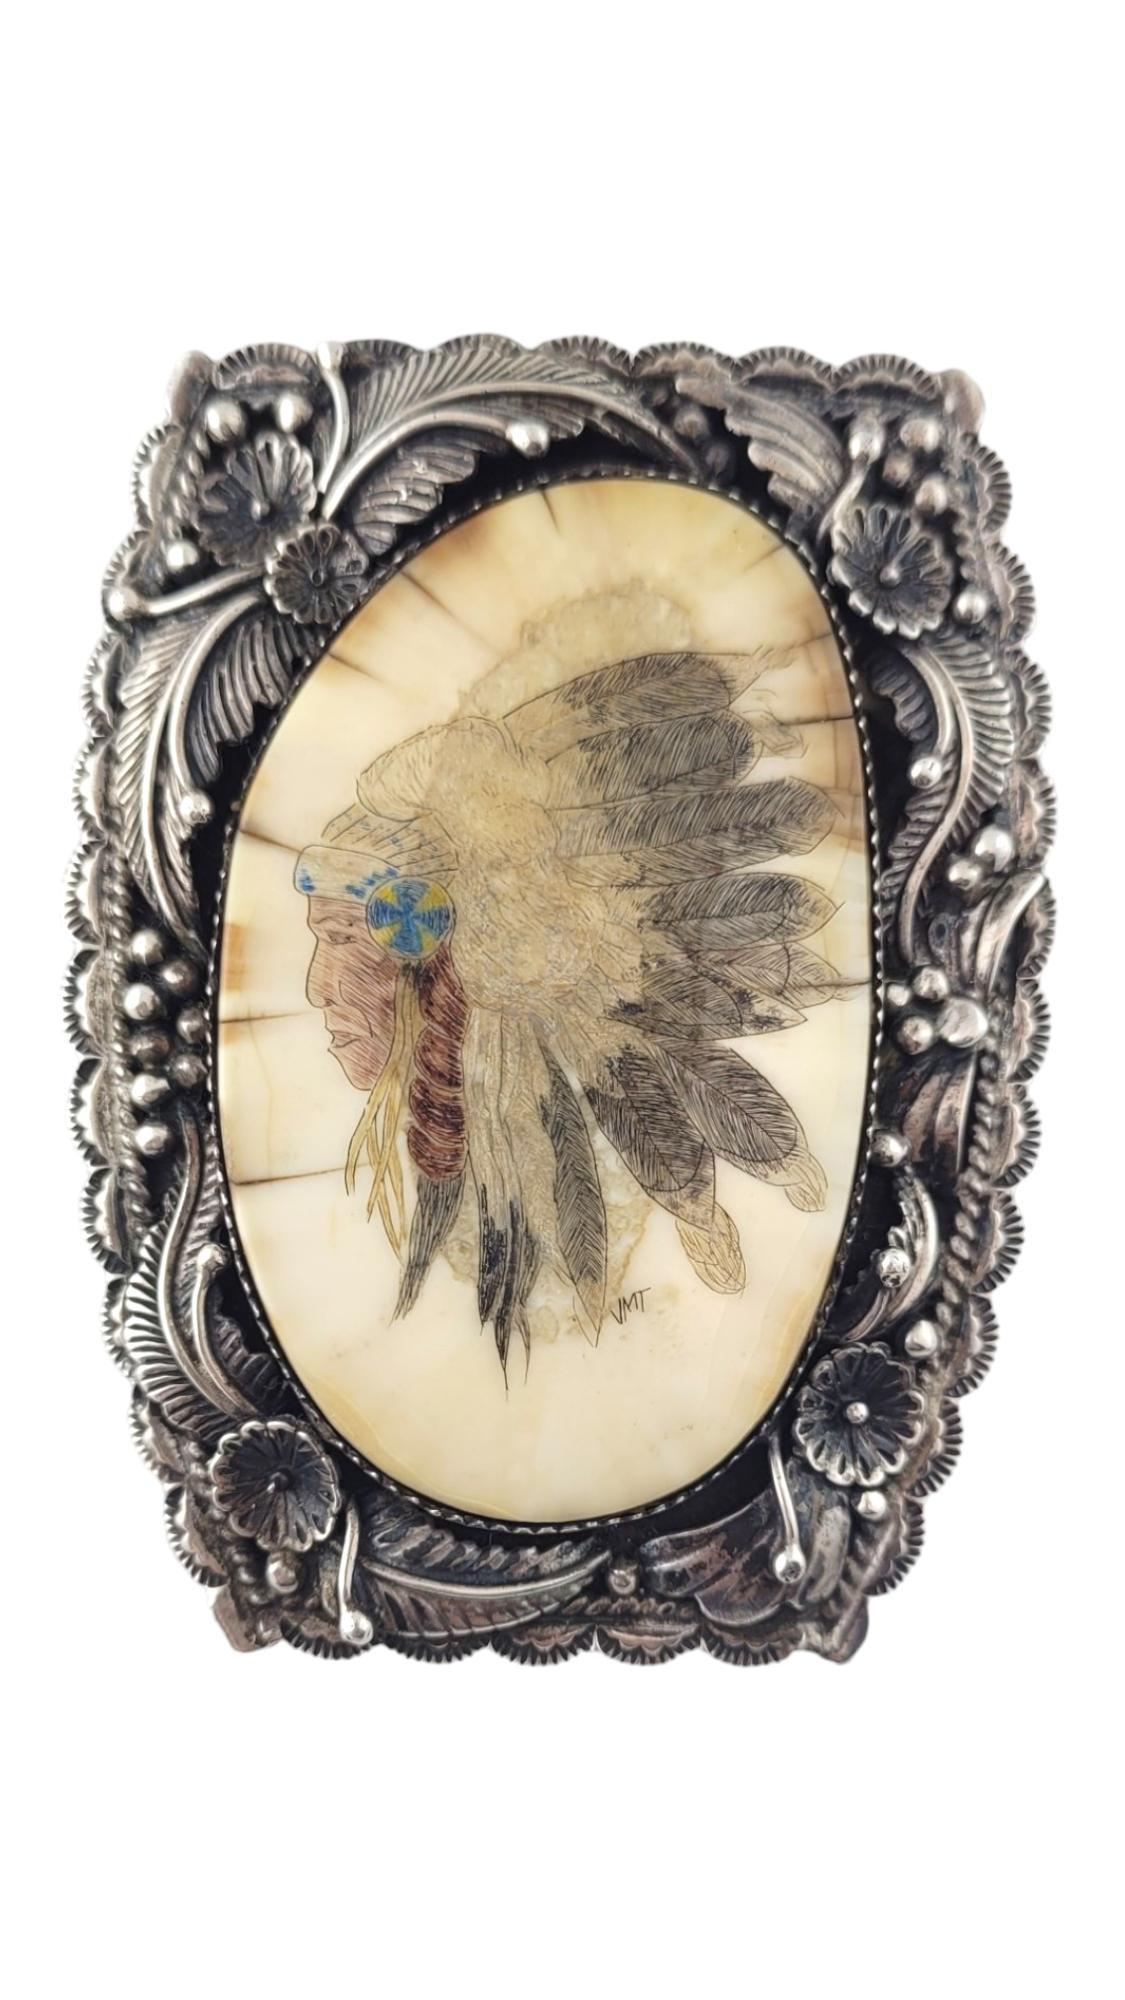 Native American D Delgarito Chief Head Sterling Silver Bolo Pendant w/ Tips

This bolo features a large white stone with a Native American Chief painted on it. Art is signed JMT. Sterling silver frame features flower, leaf and mead design with